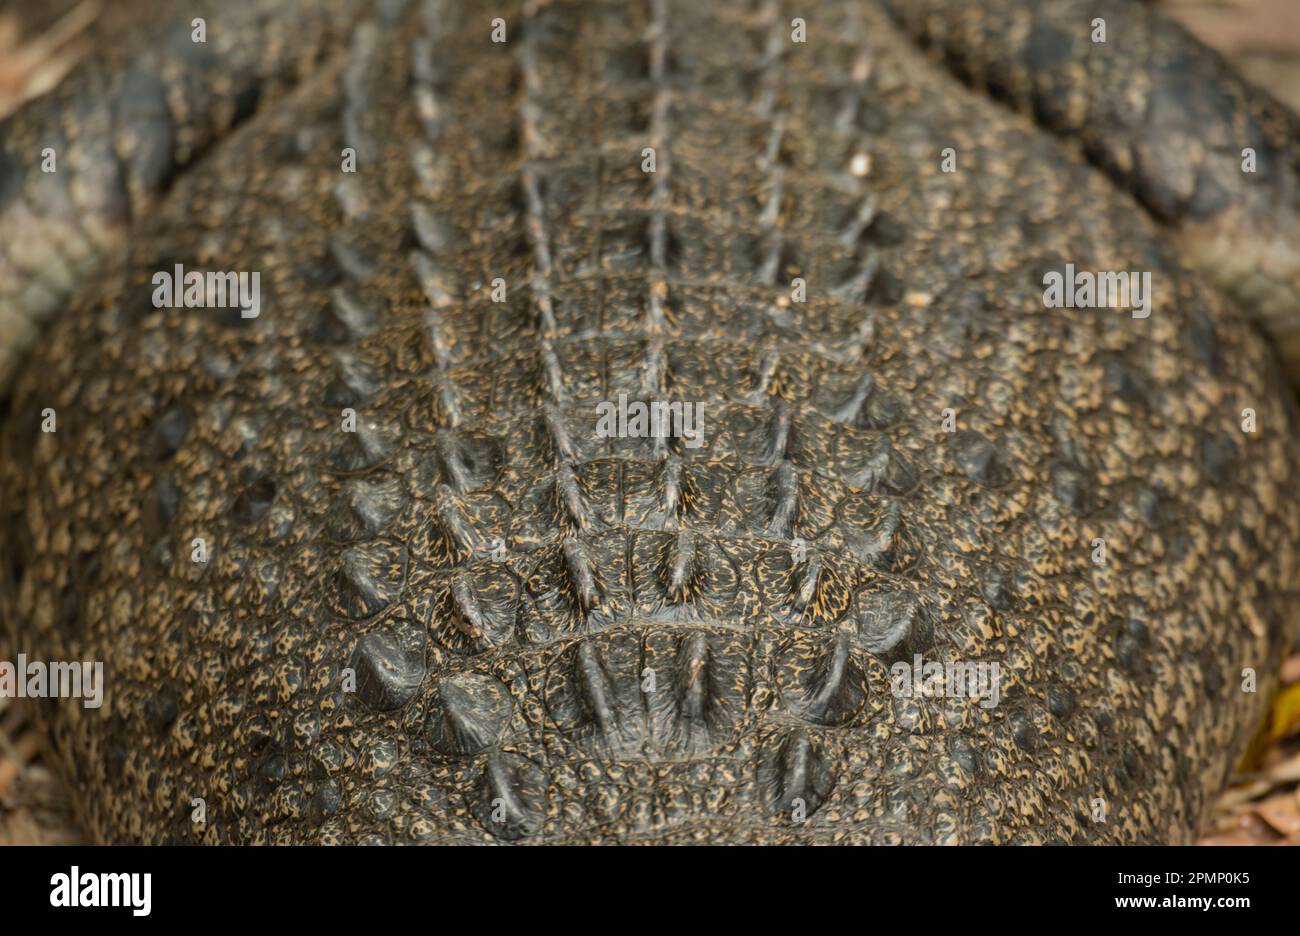 Close-up detail of the skin on the back of a crocodile at a Wildlife Habitat; Port Douglas, Queensland, Australia Stock Photo